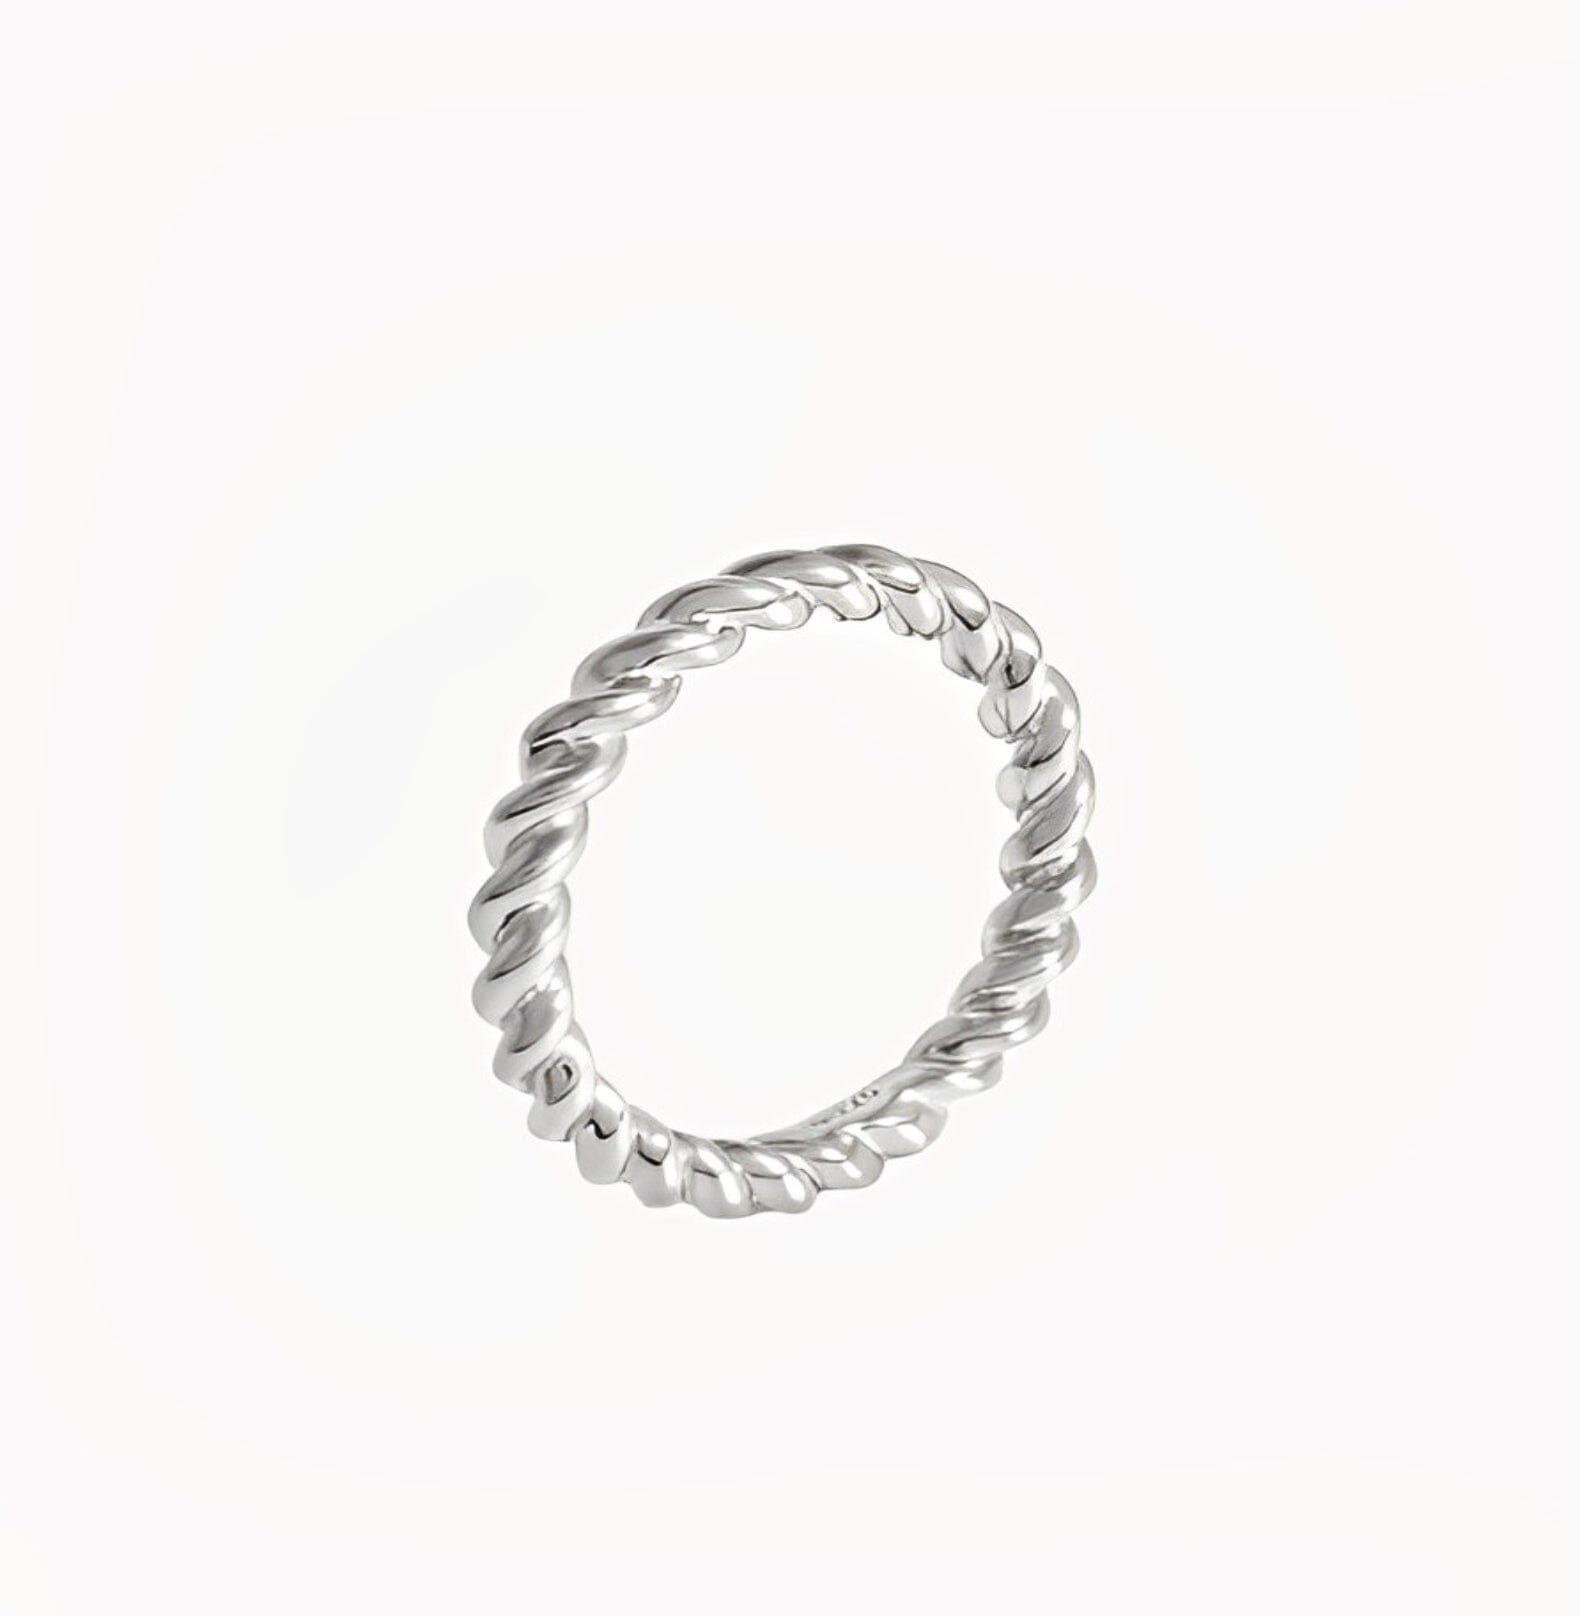 FLUX STACKING RING ring Yubama Jewelry Online Store - The Elegant Designs of Gold and Silver ! 